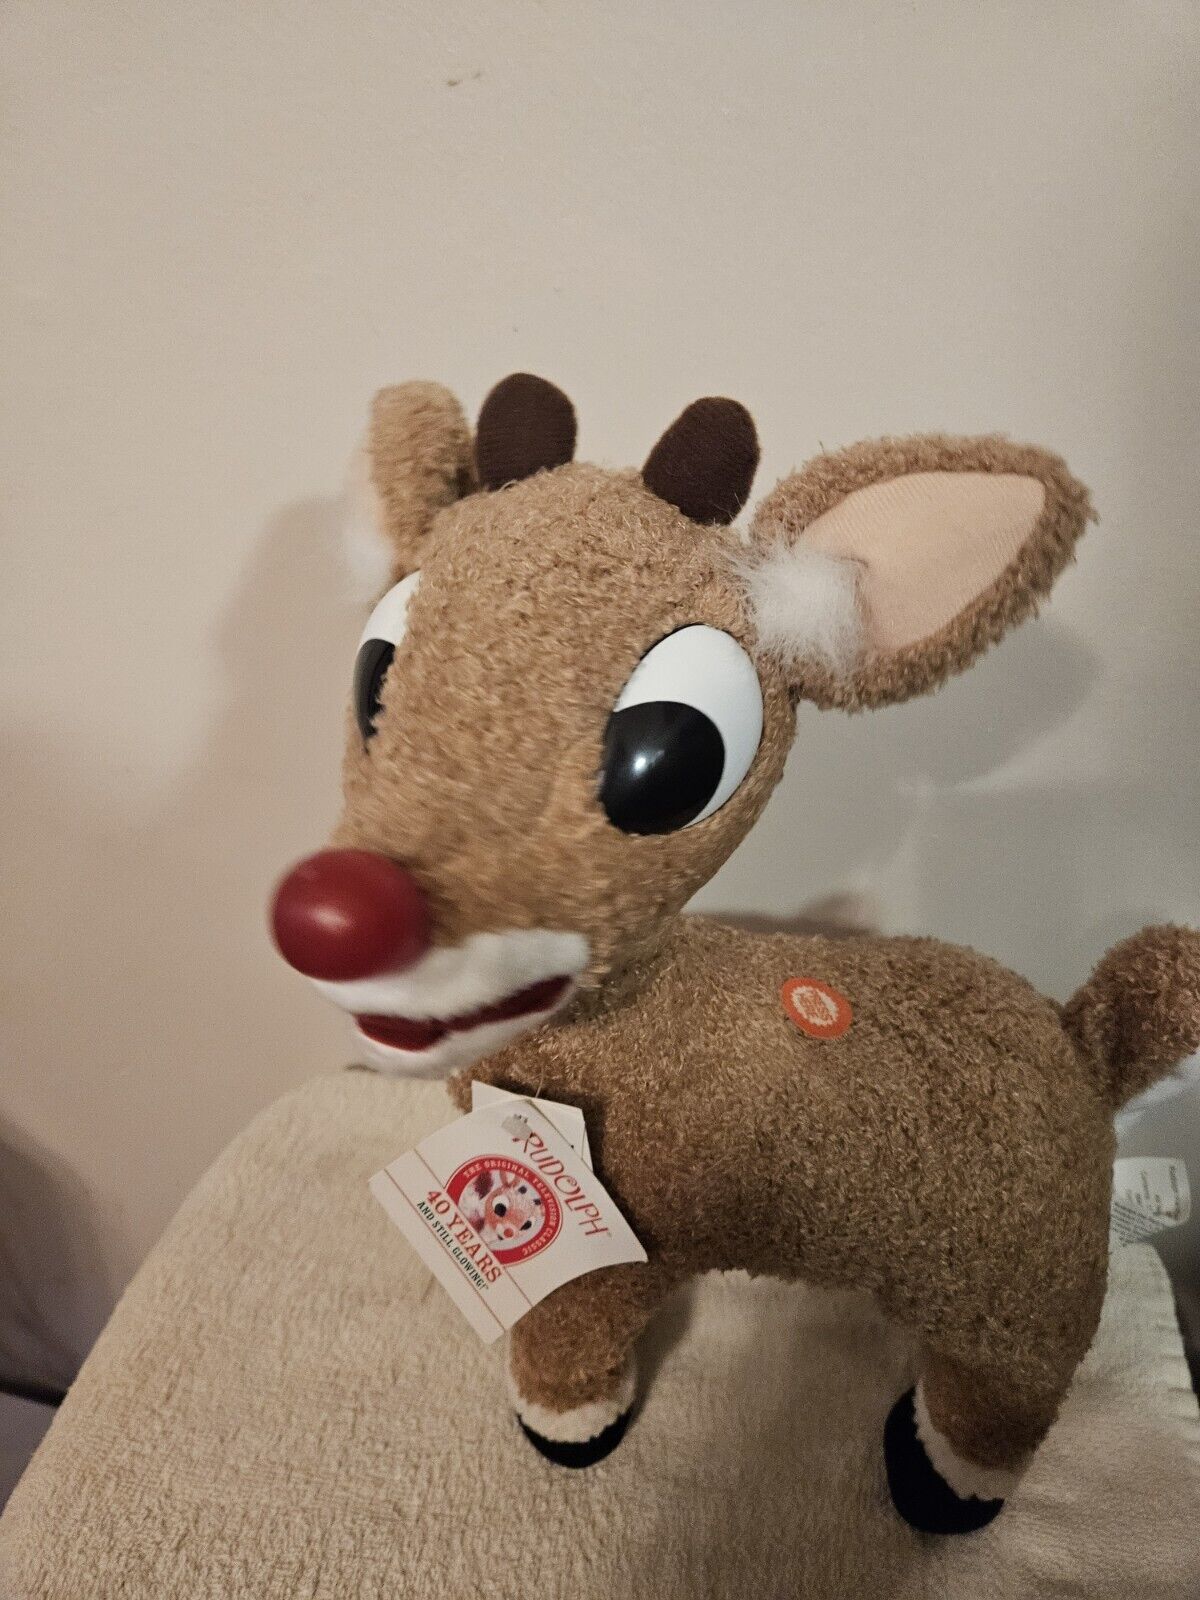 Vintage 2004 Rudolph the Red-Nosed Reindeer Animated Singing Plush Coyne's 14.5”